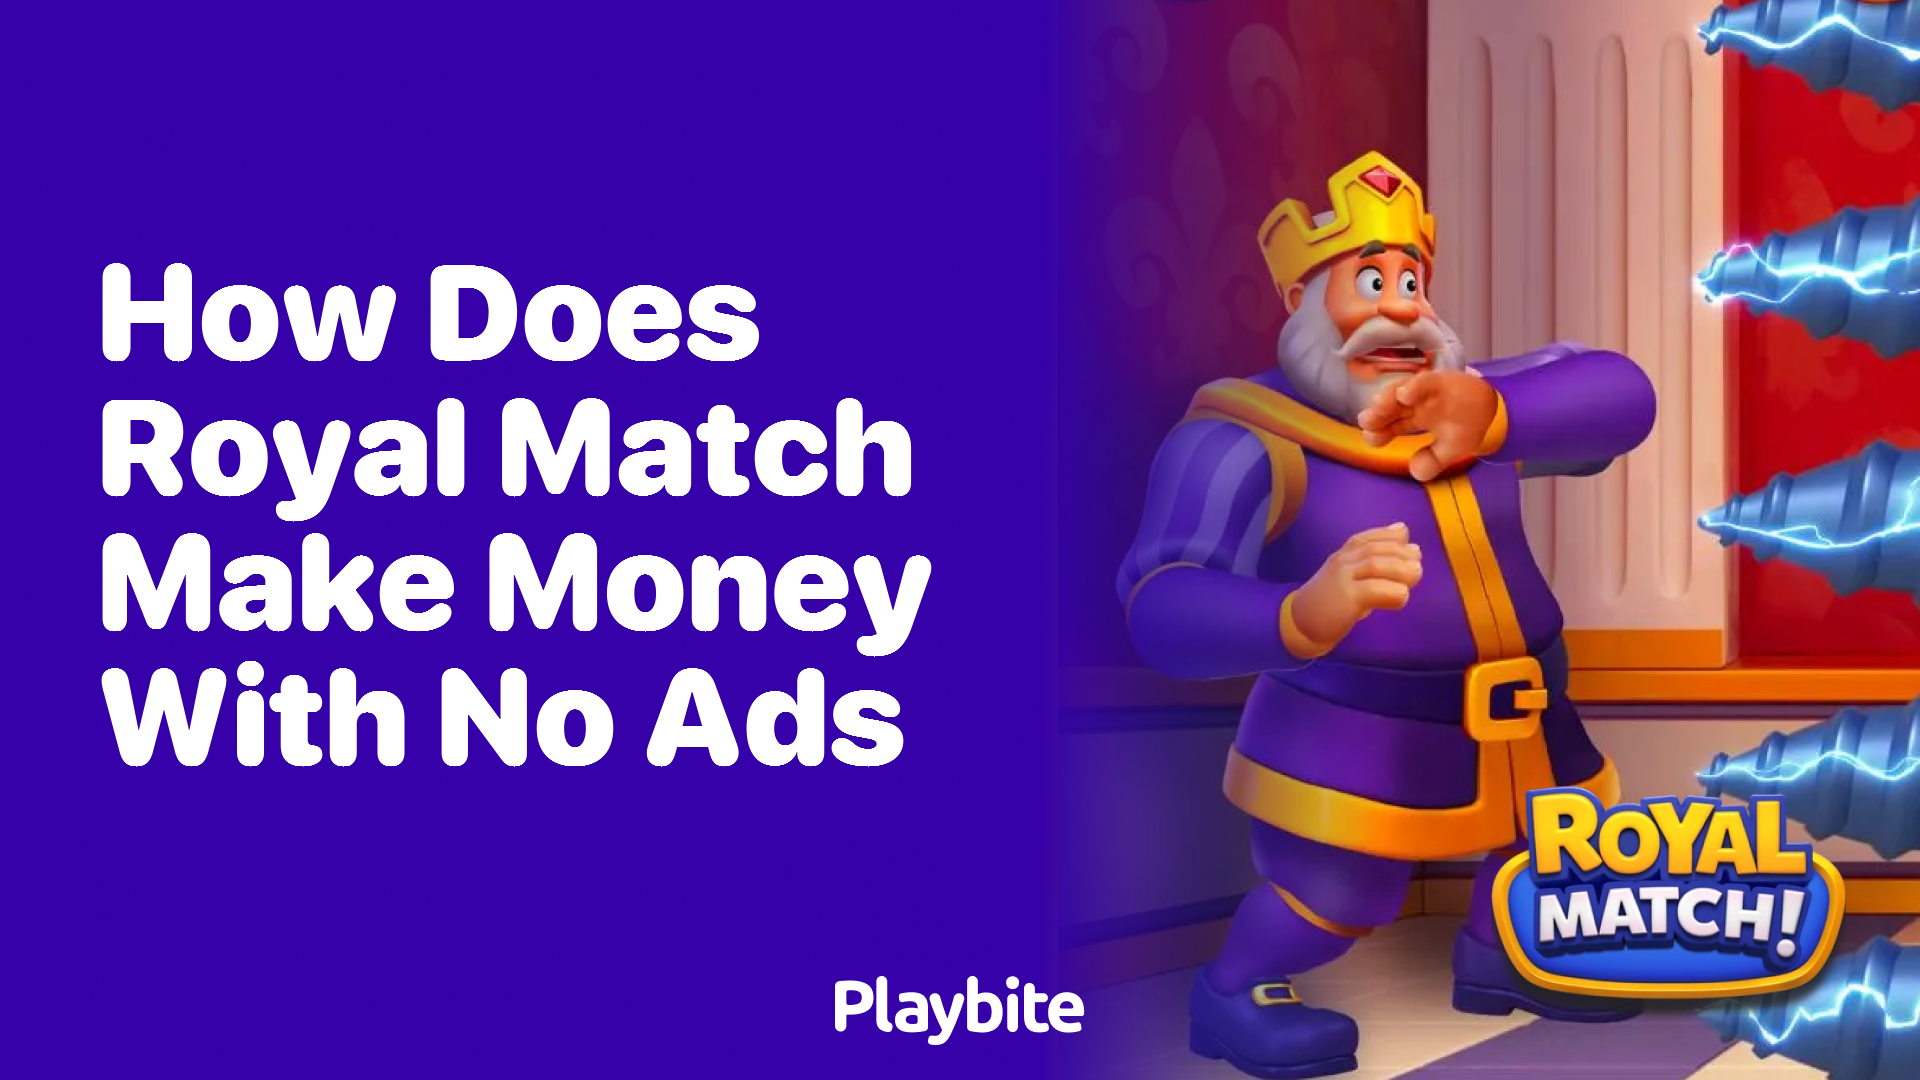 How Does Royal Match Make Money With No Ads?